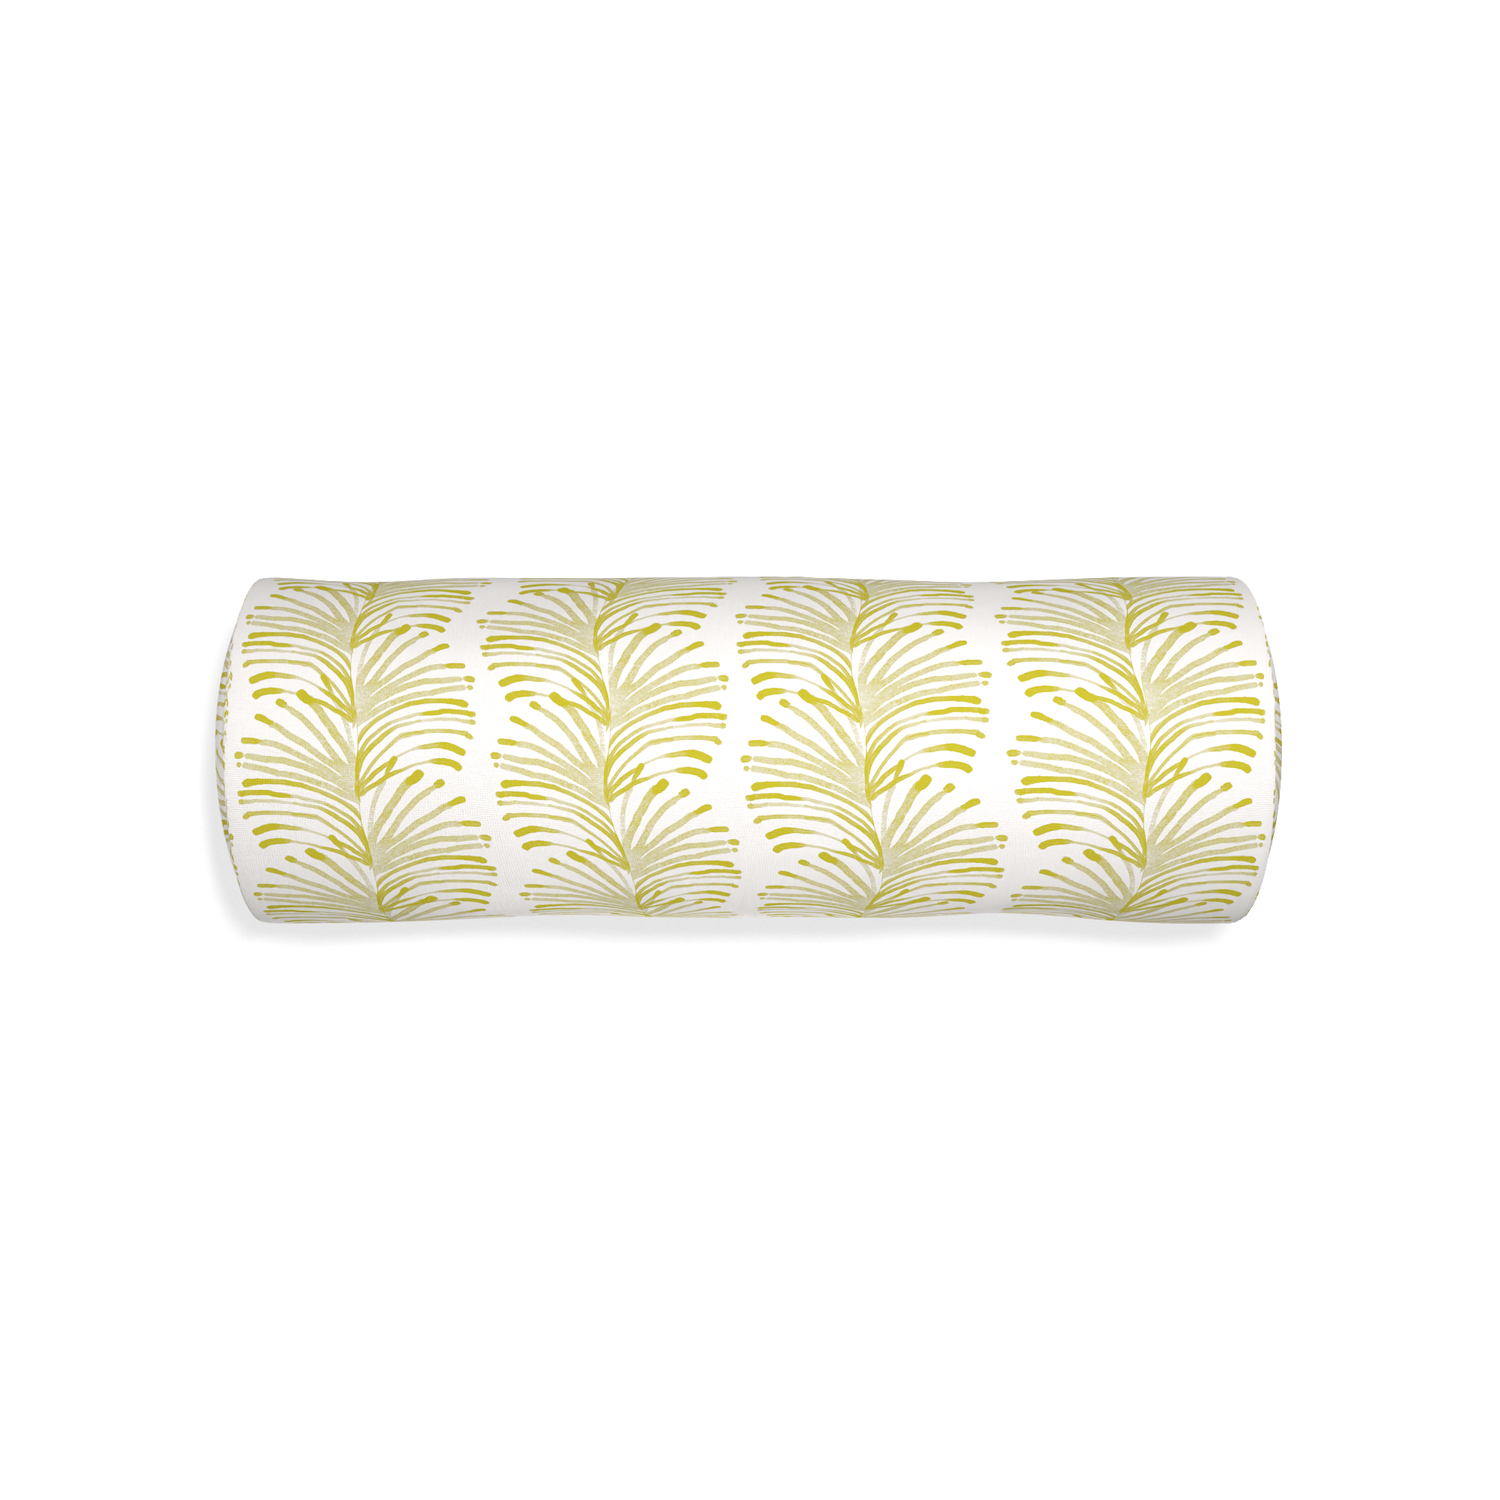 Bolster emma chartreuse custom yellow stripe chartreusepillow with none on white background